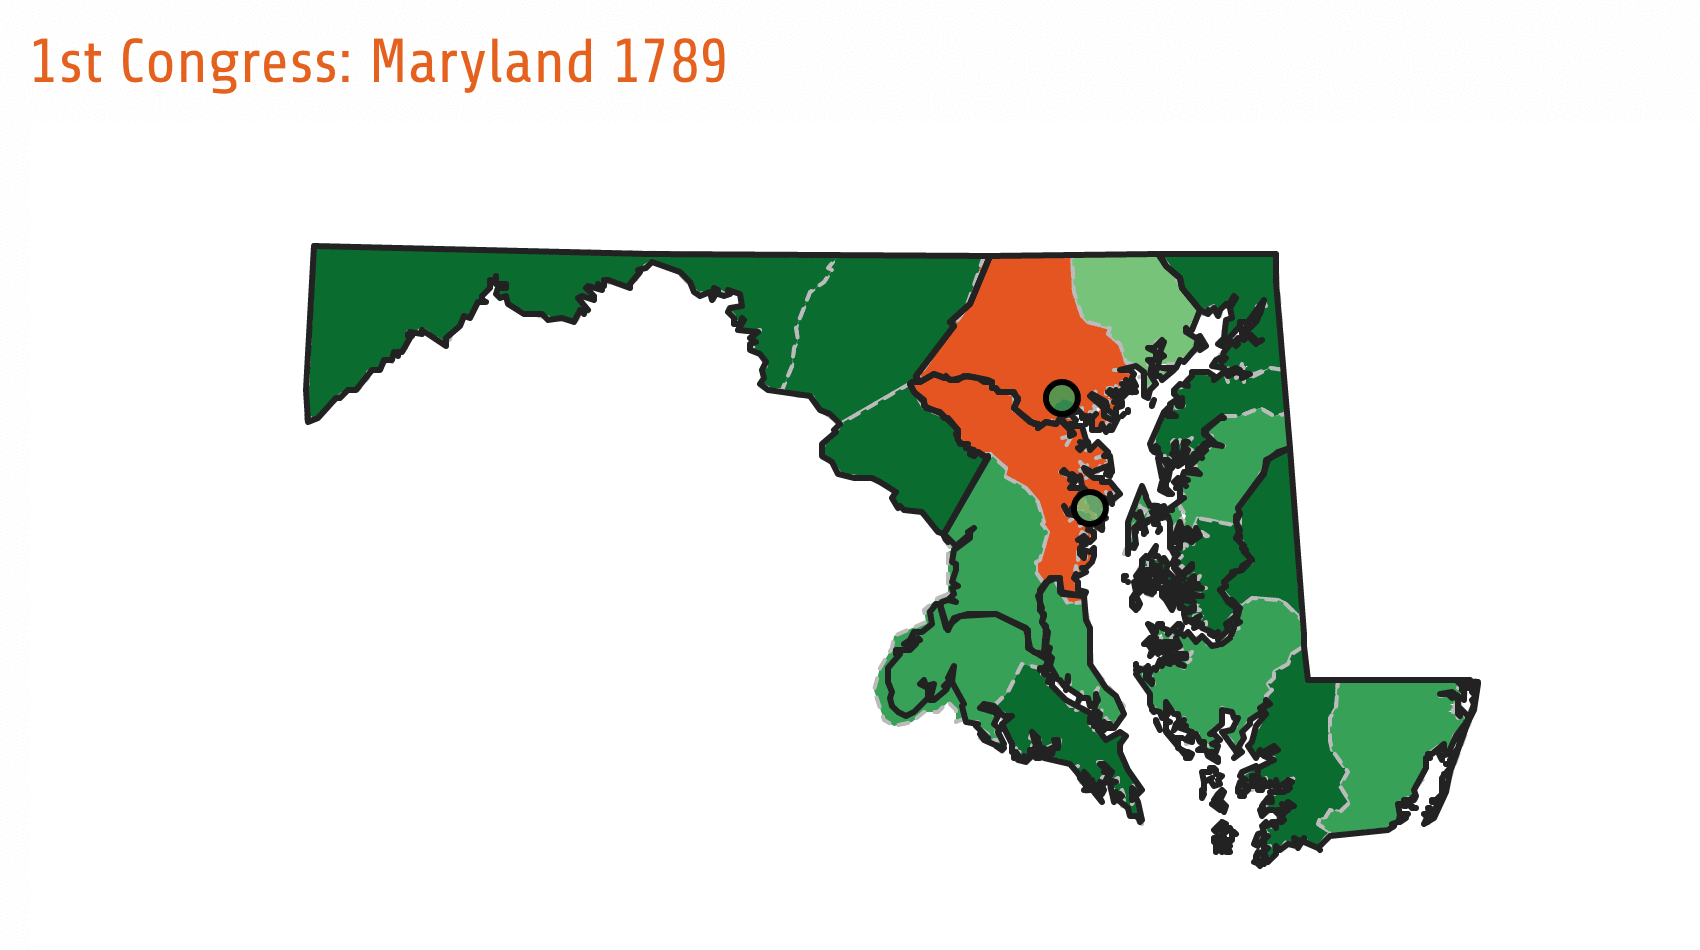 How voting patterns changes in Maryland.